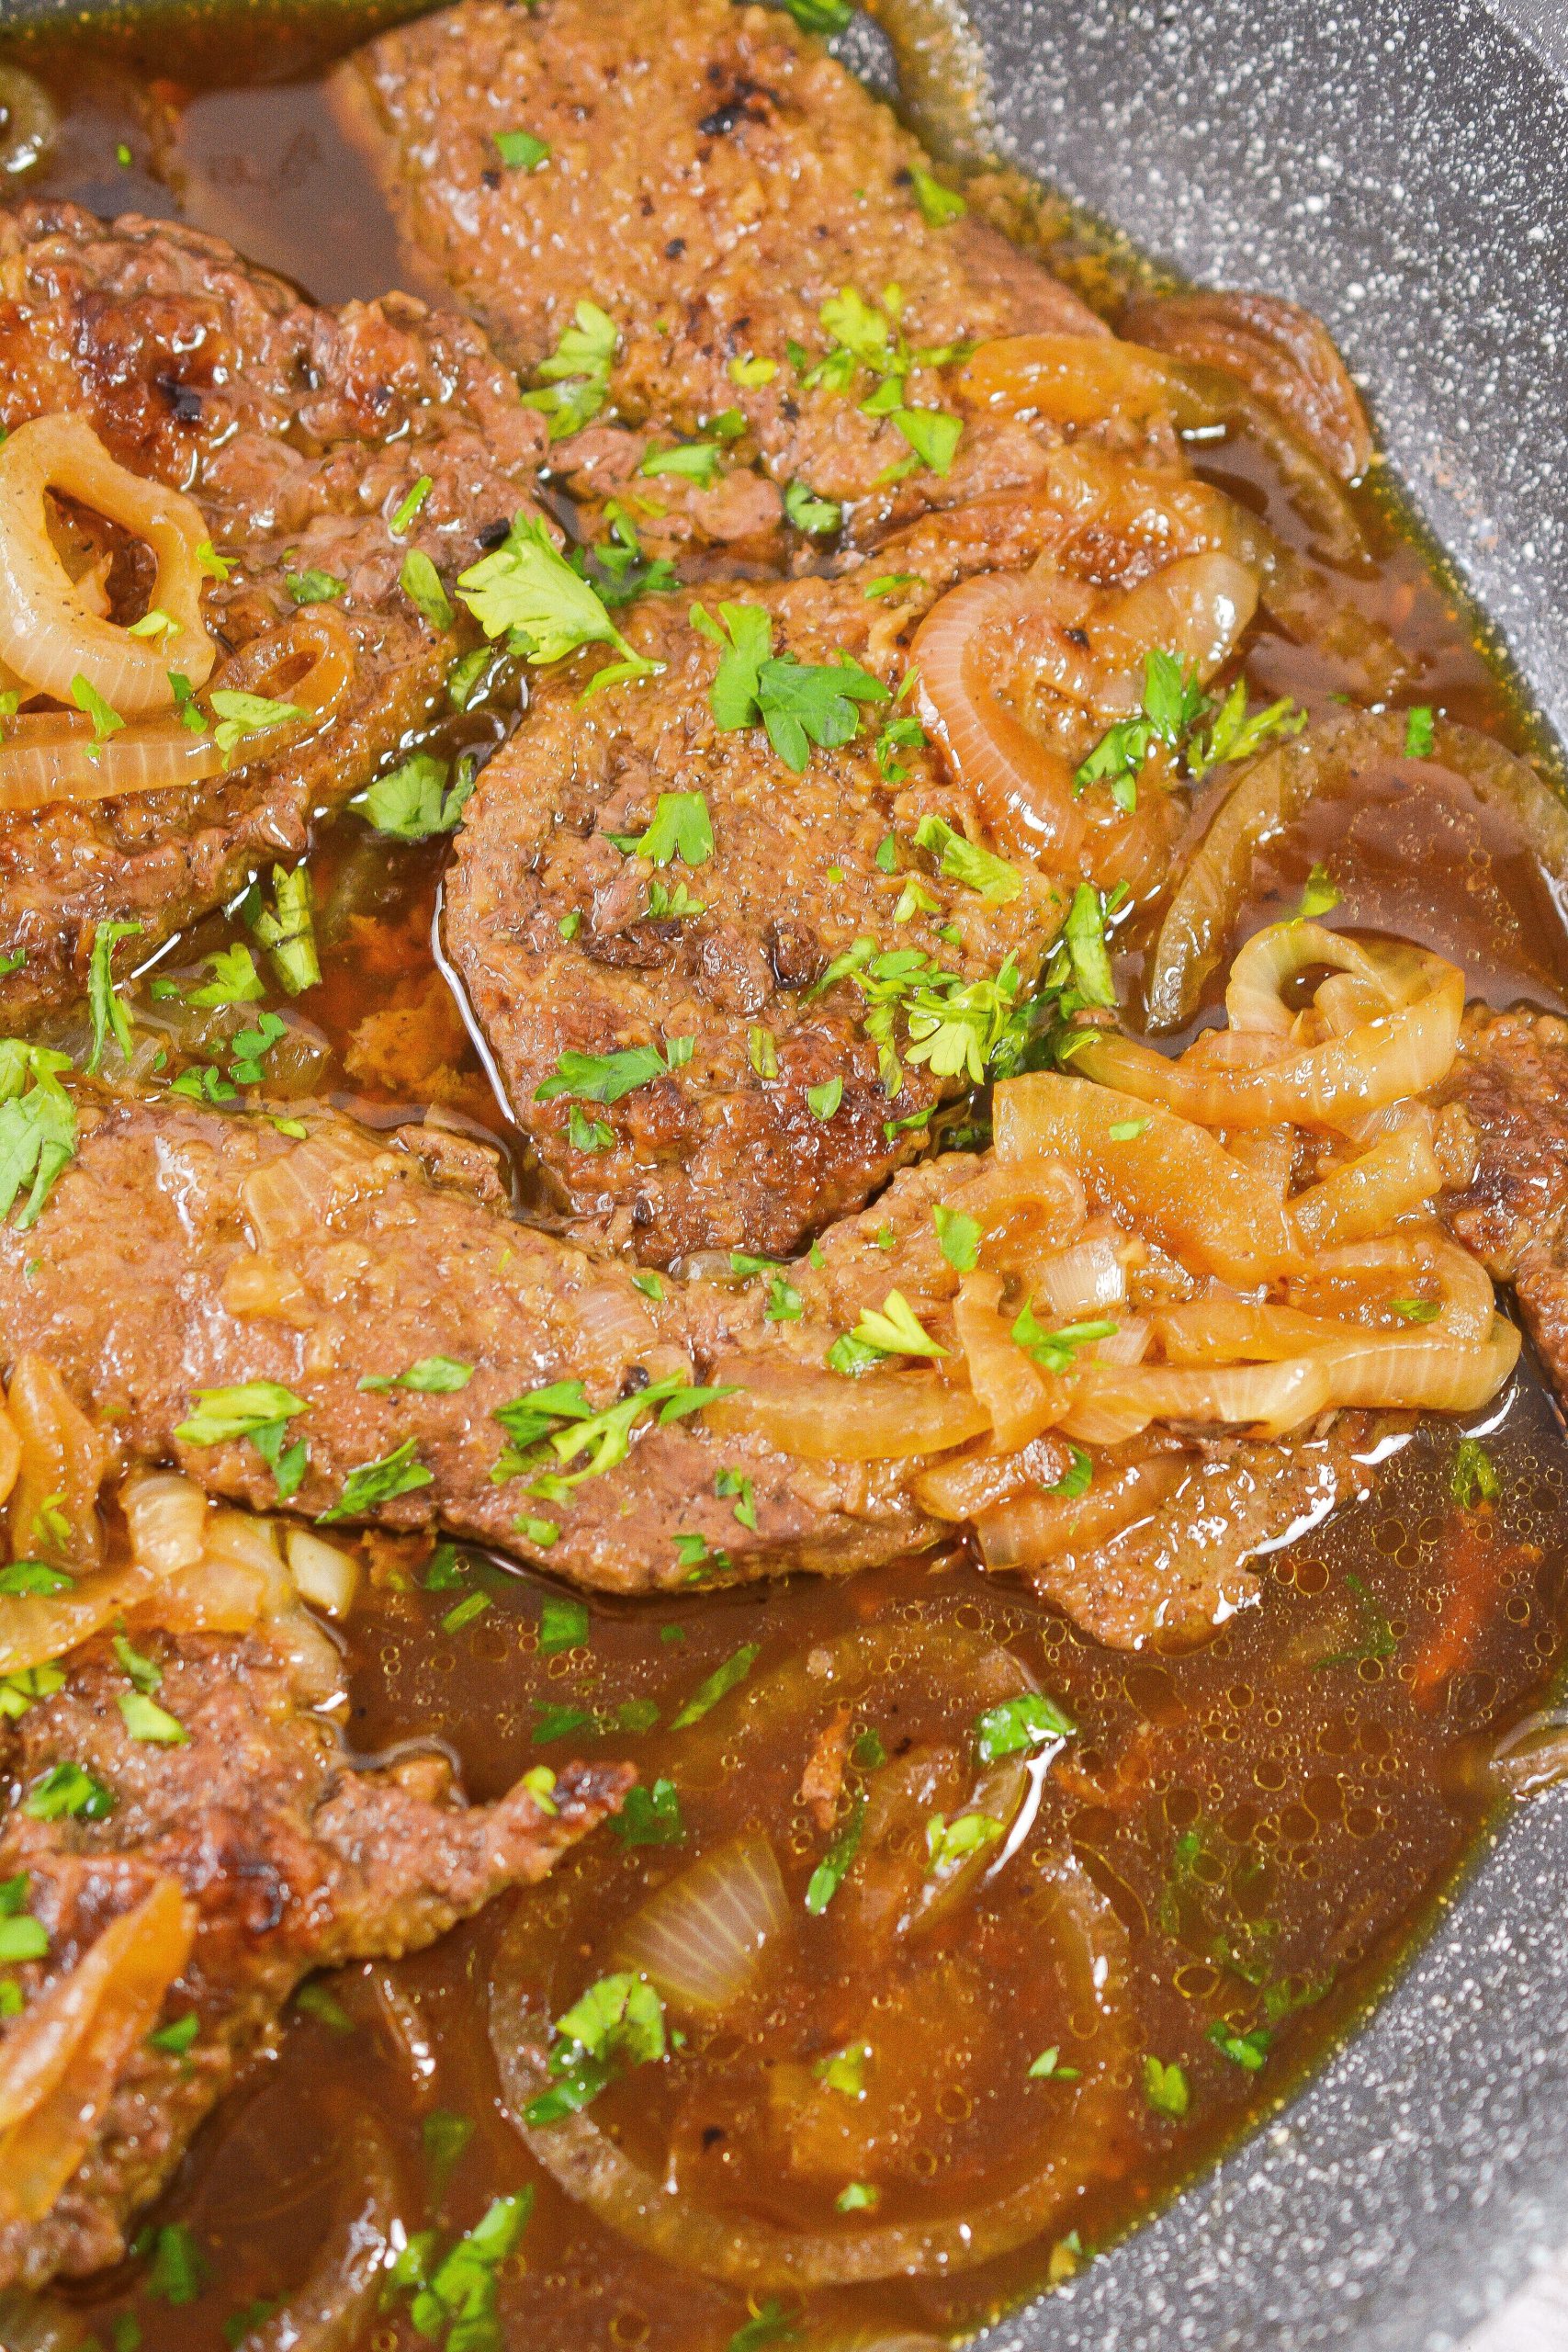 Liver and Onions, Liver and Onions recipe